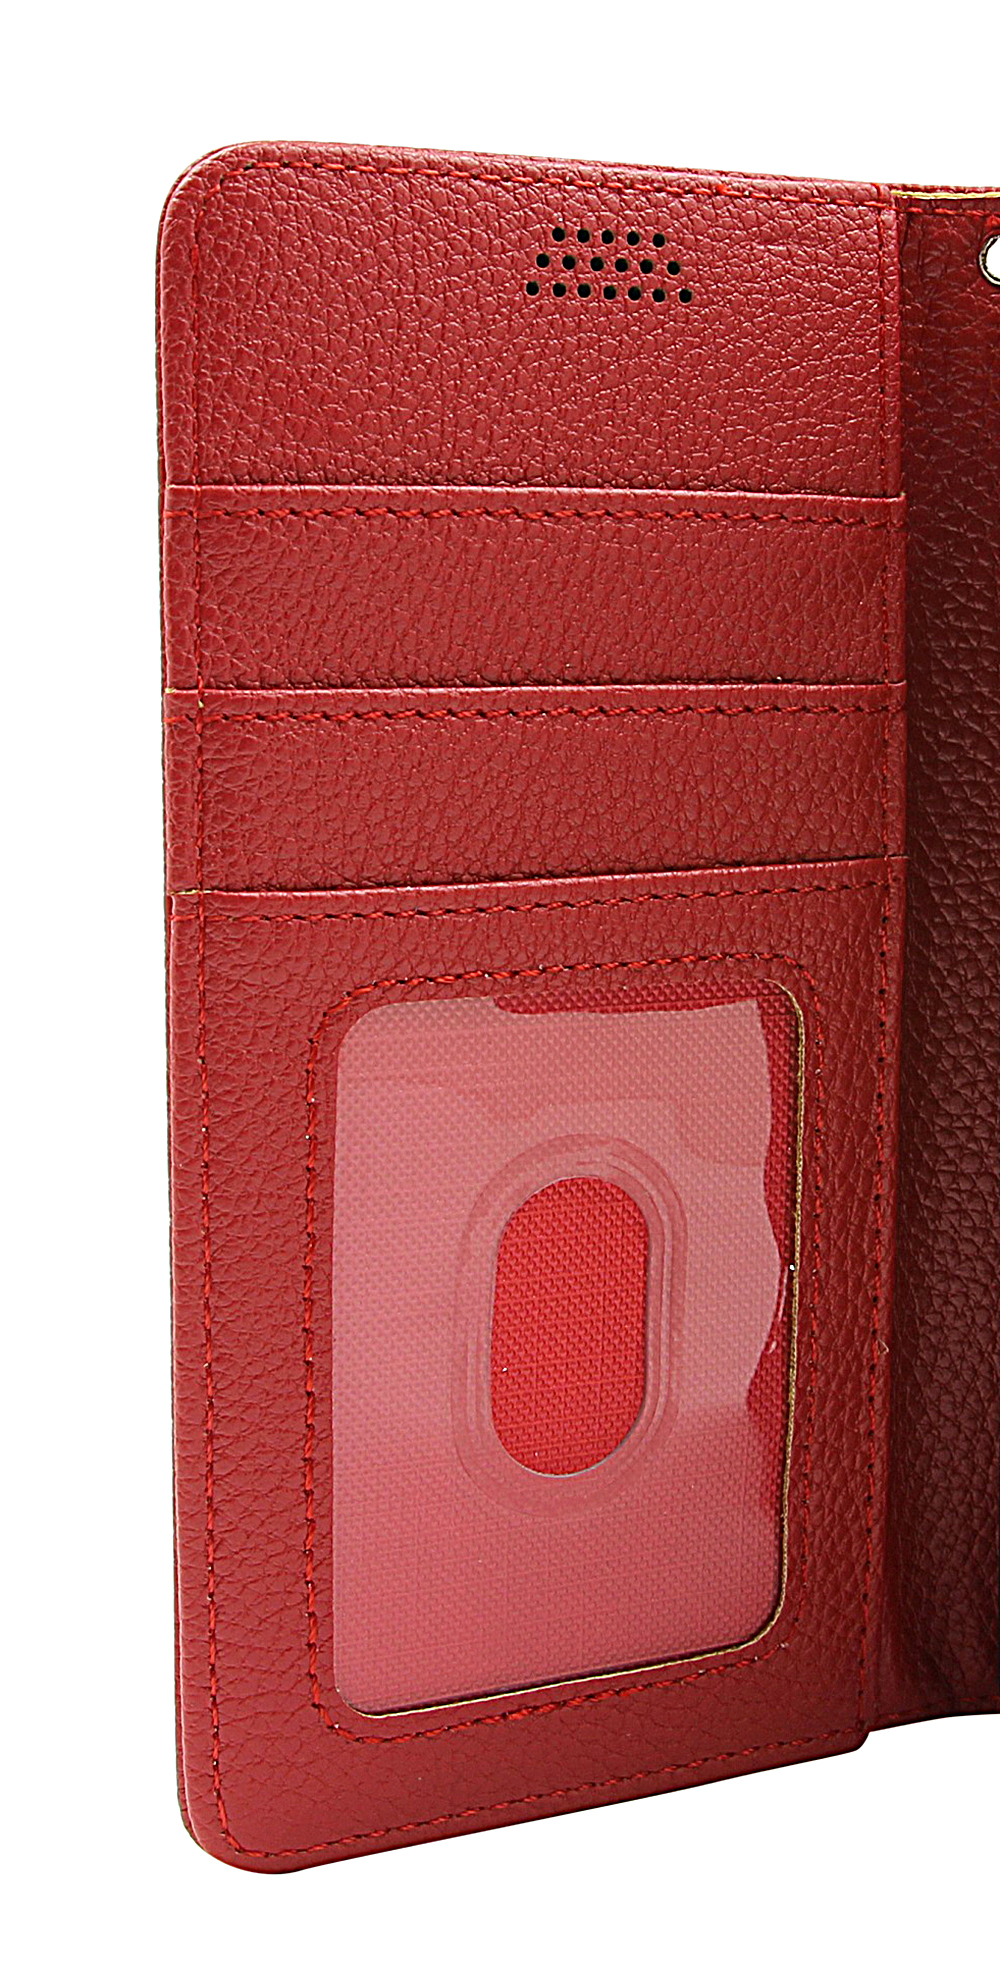 New Standcase Wallet iPhone 14 (6.1)